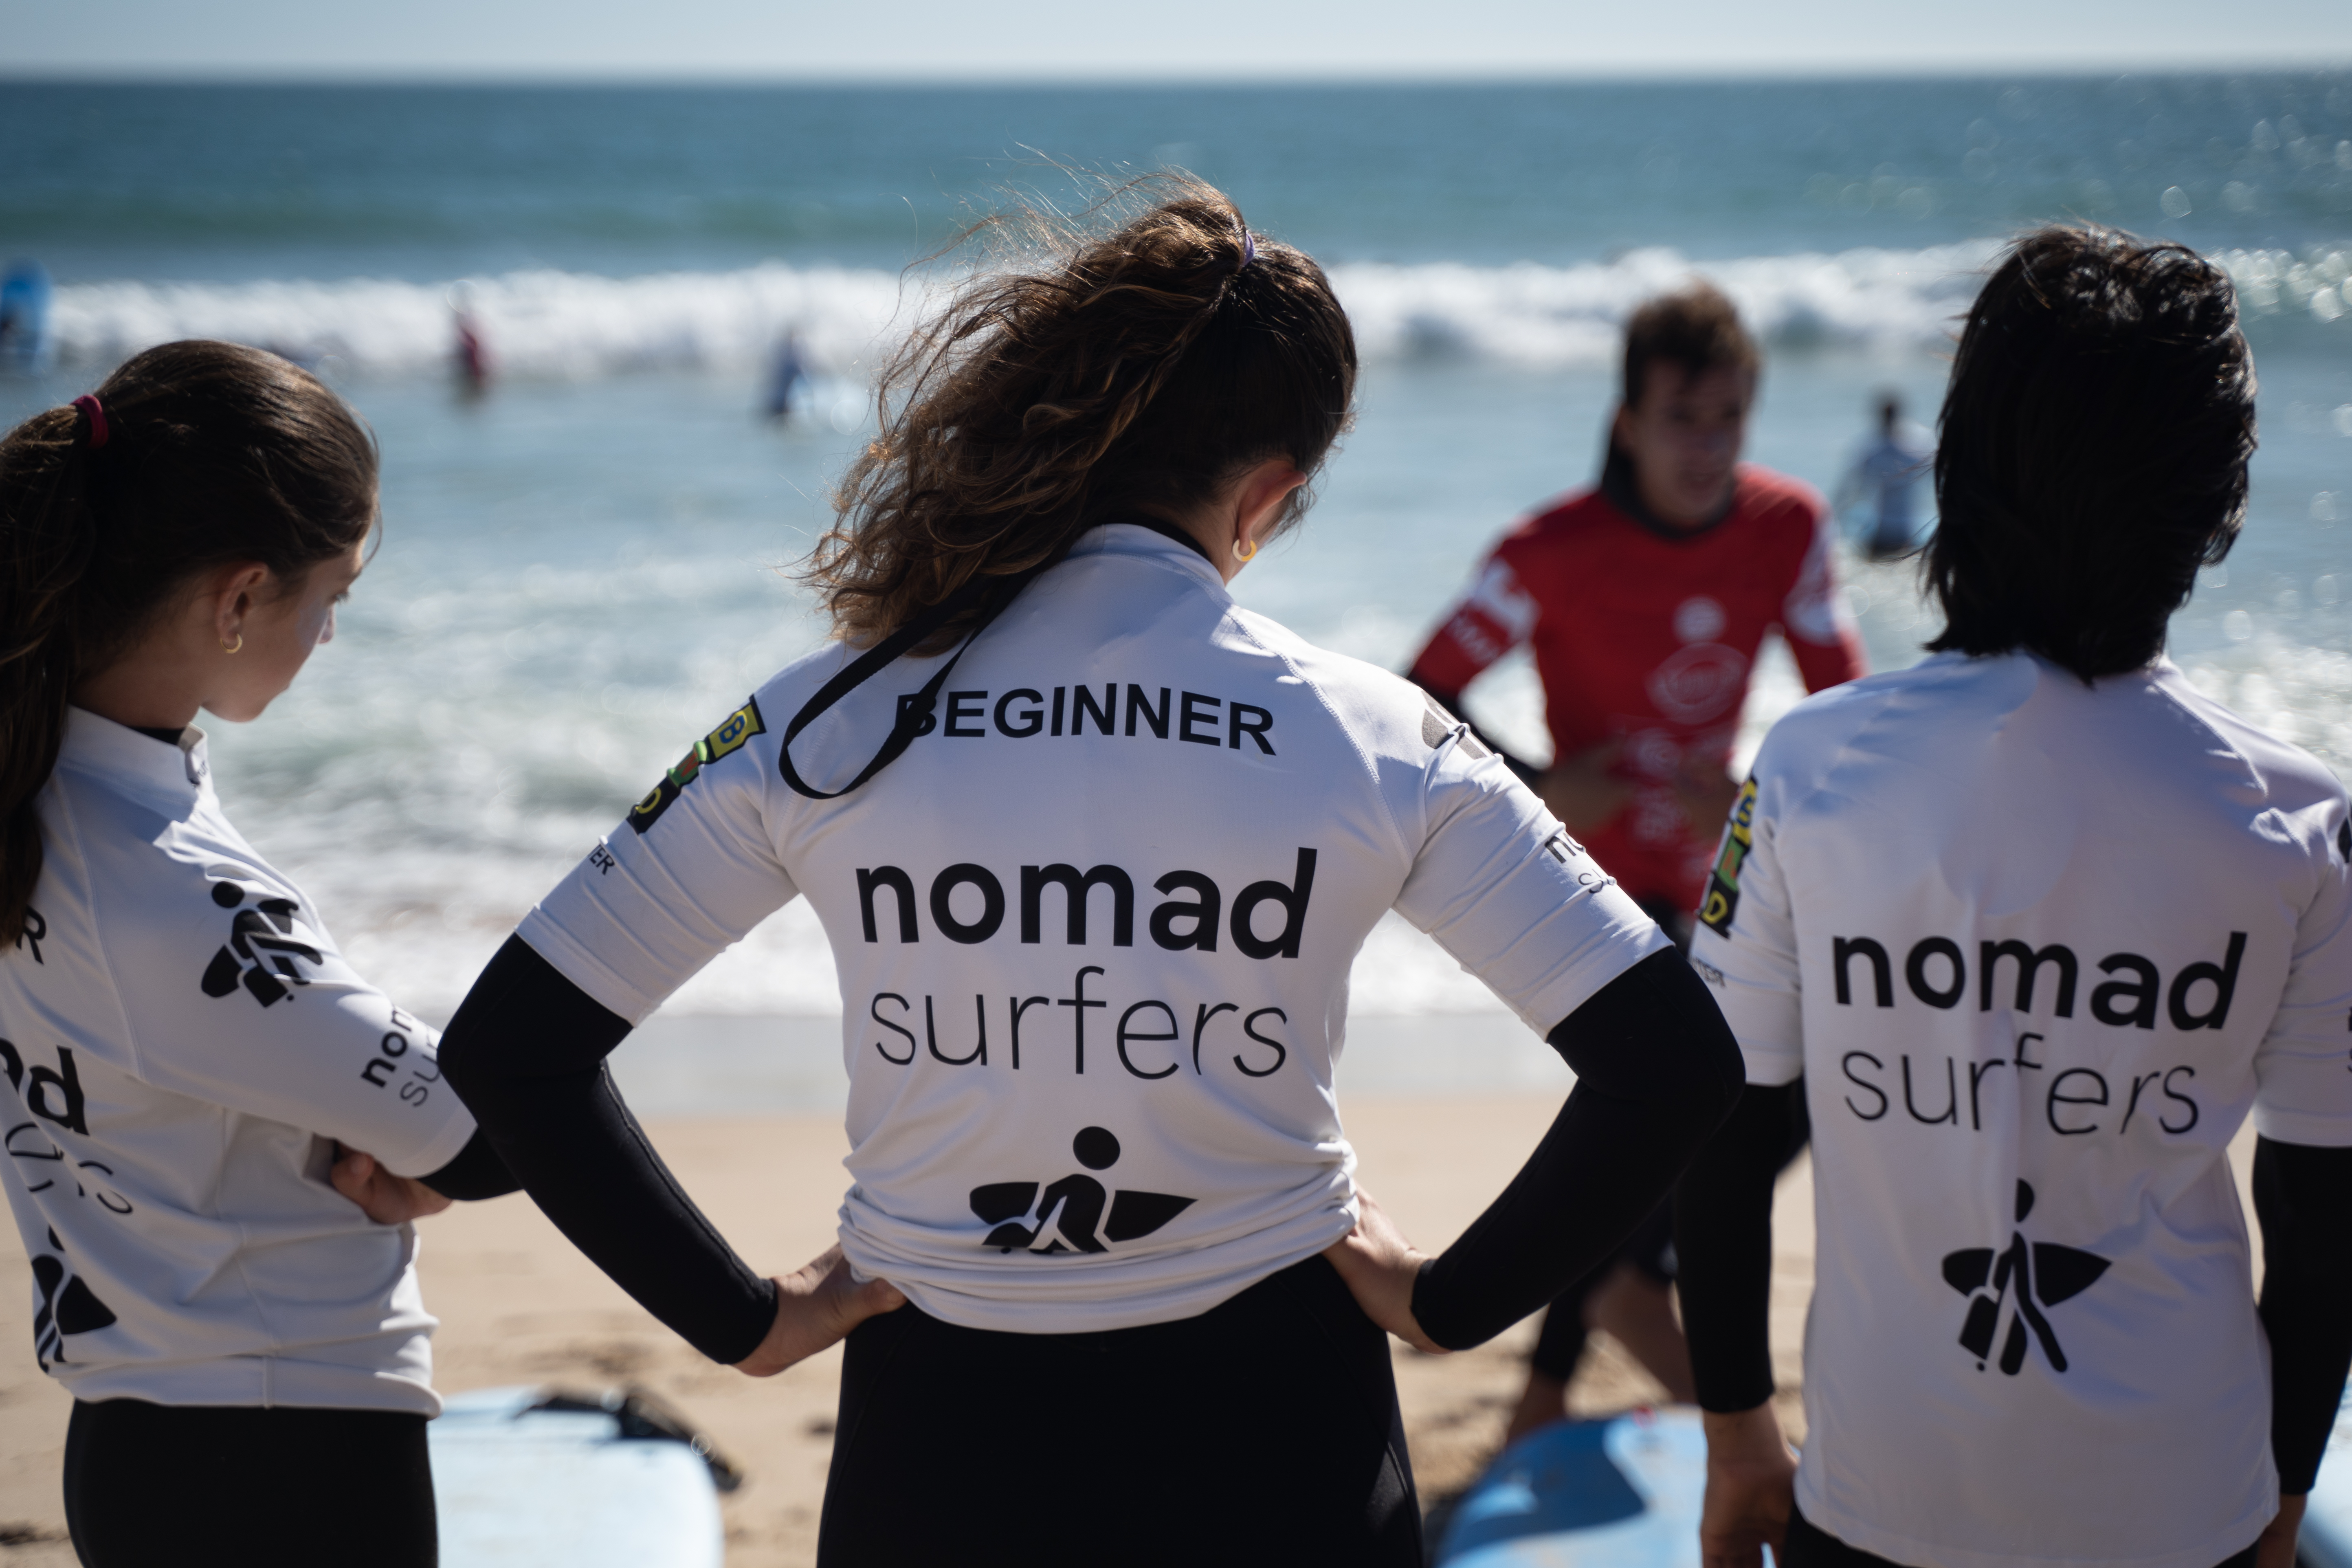 nomad surfers student nomad surf camp - young adults - lisbon - erasmus - university students retreats for adults surf camp lessons children teen summer young adult best nomad kid bali canggu beginners uluwatu france moliets portugal algarve